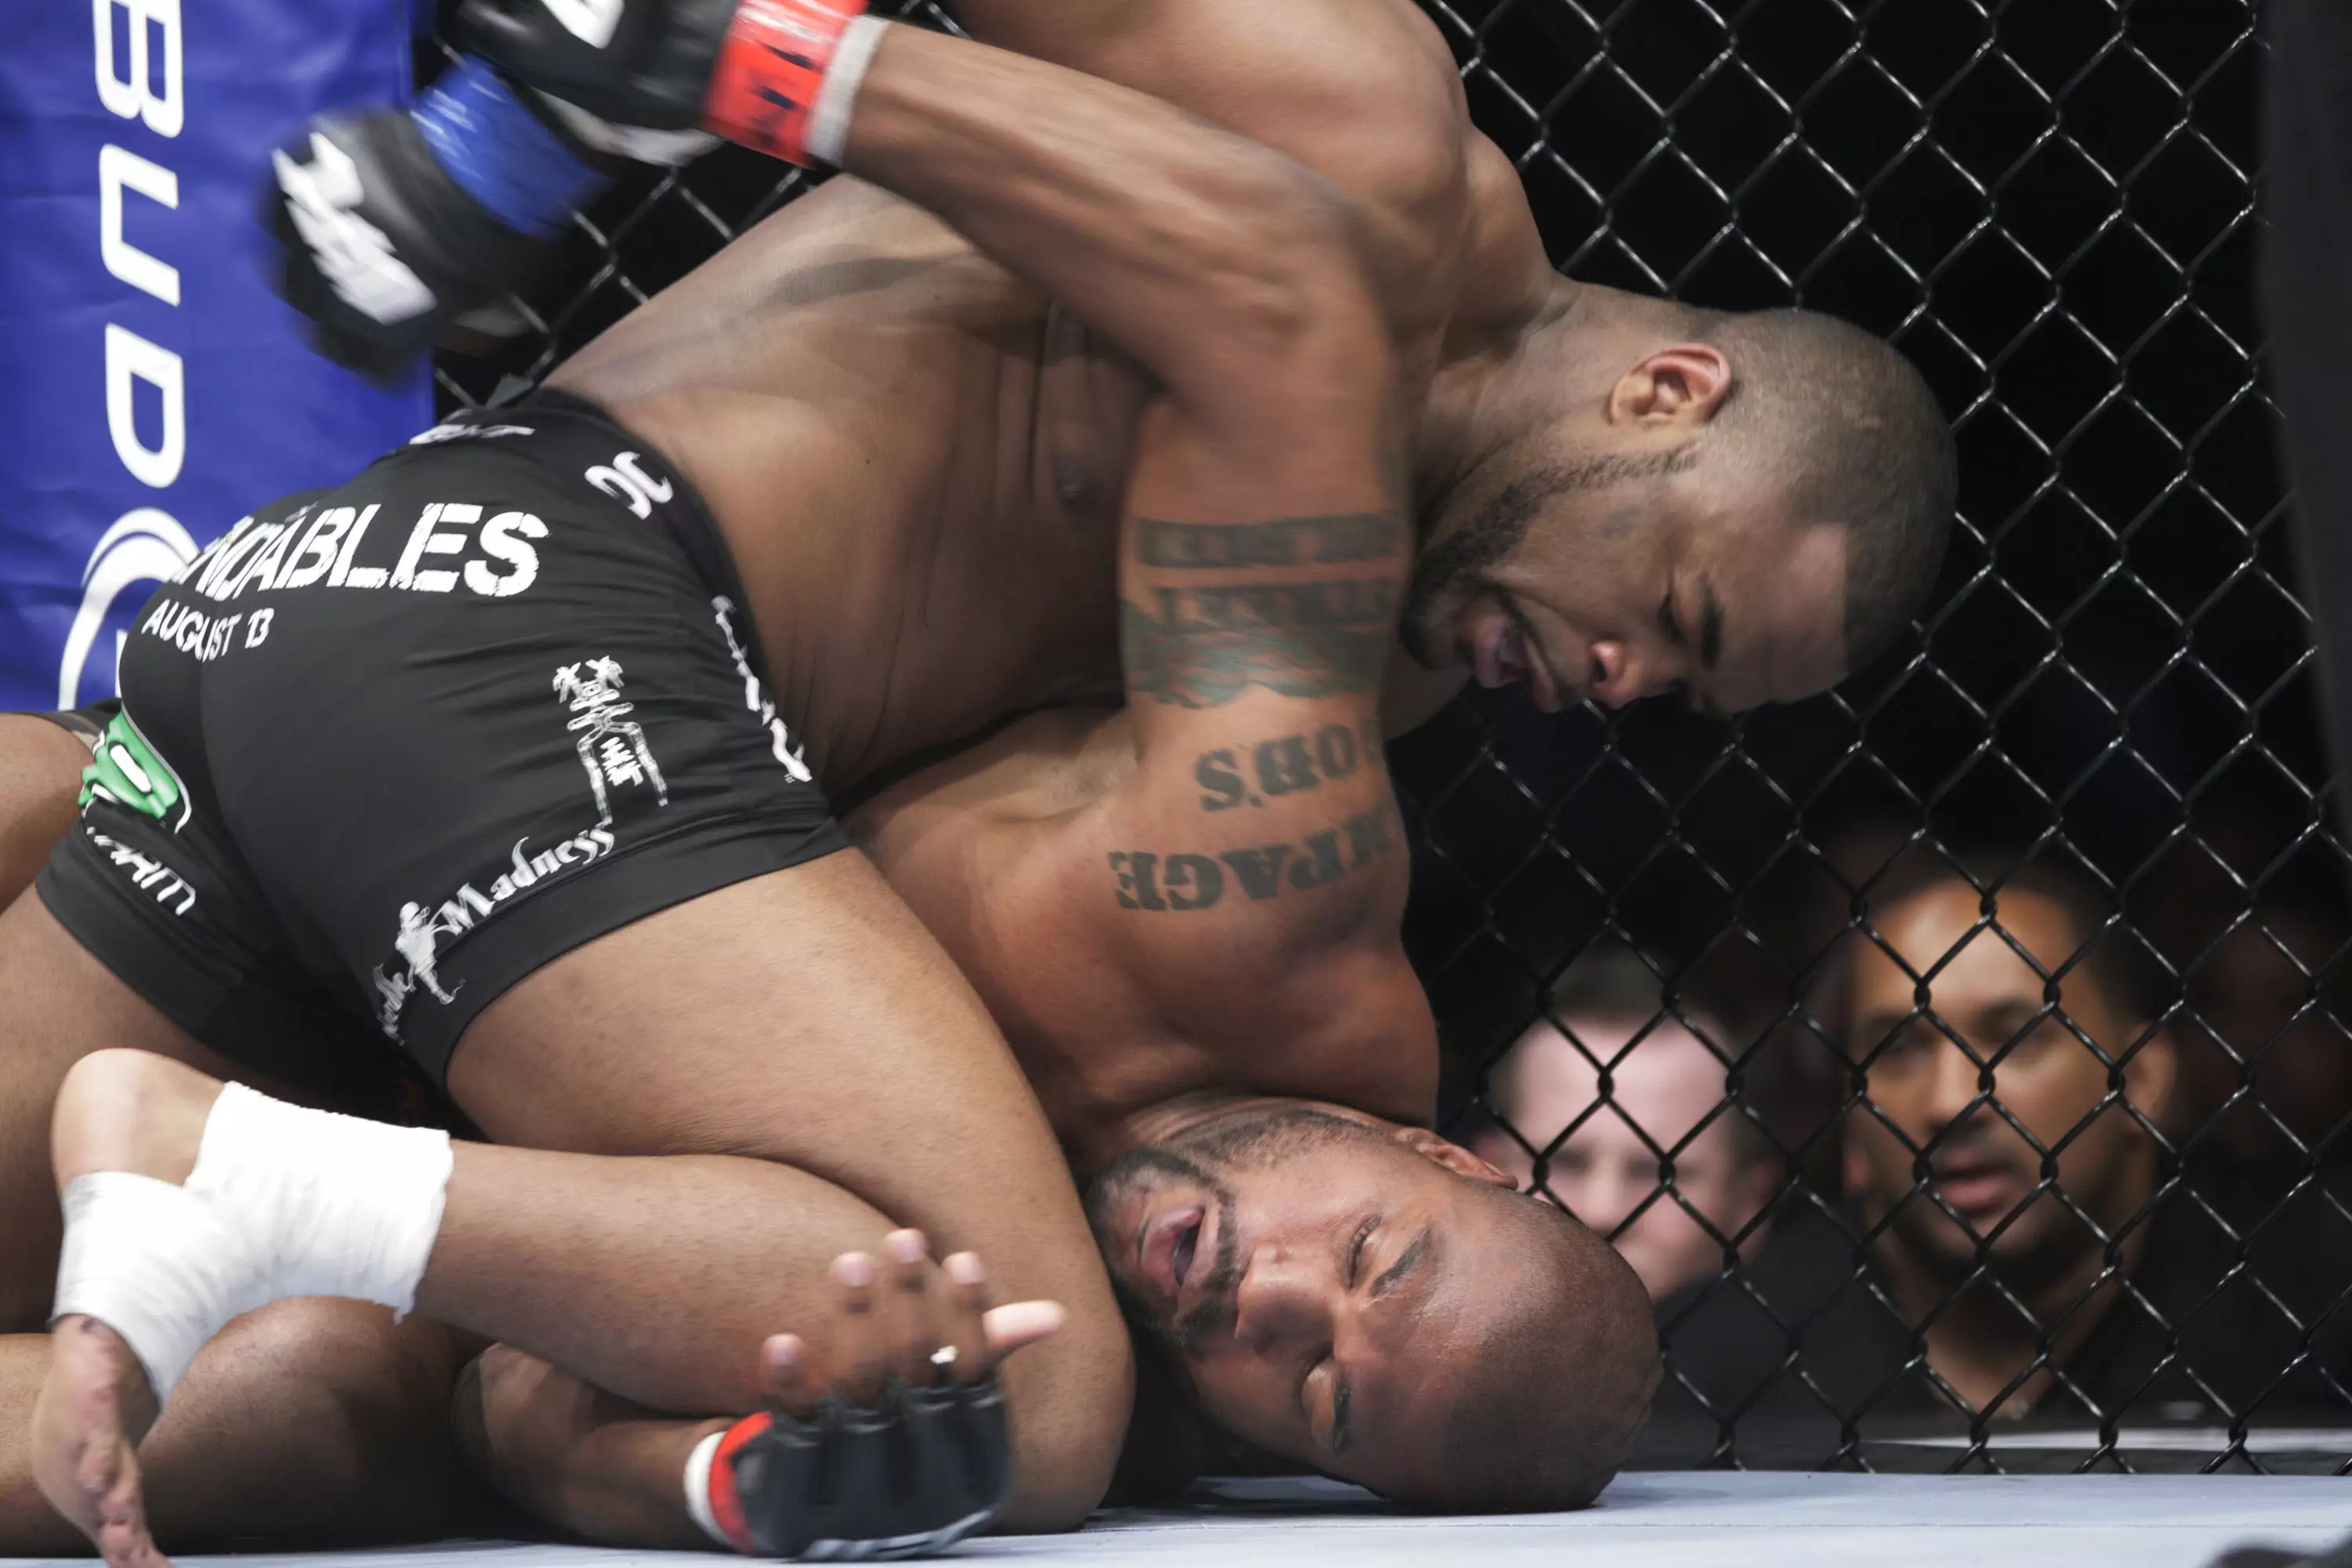 Rashad Evans has beaten some of the biggest names in mixed martial arts.